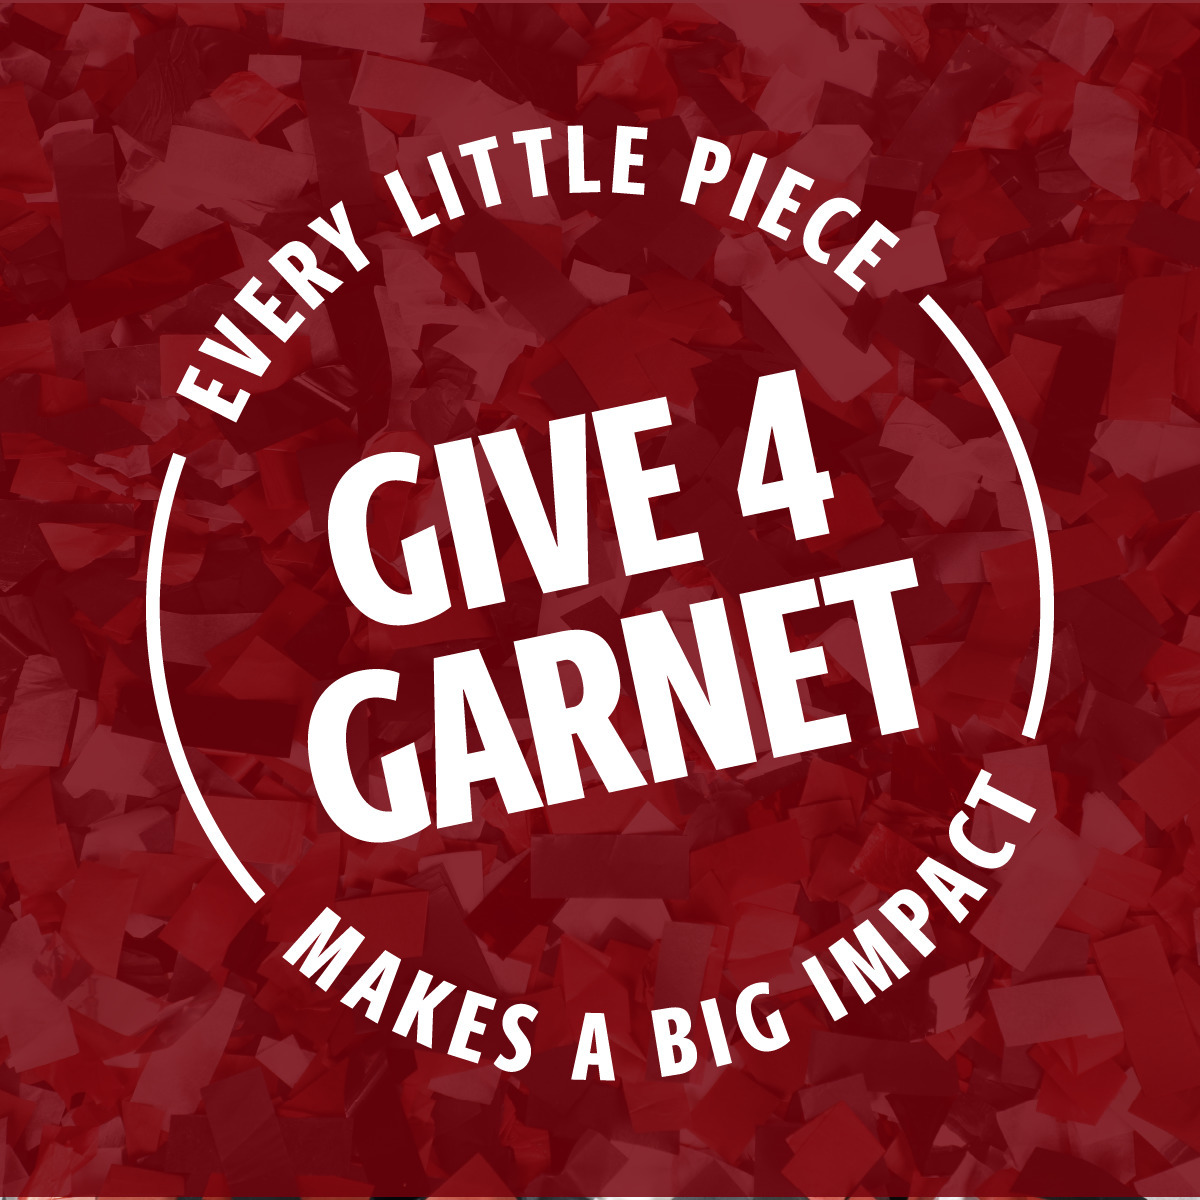 Confetti with a garnet colored overlay and the UofSC stamp that has the text Give4Garnet, every little piece makes a big impact.